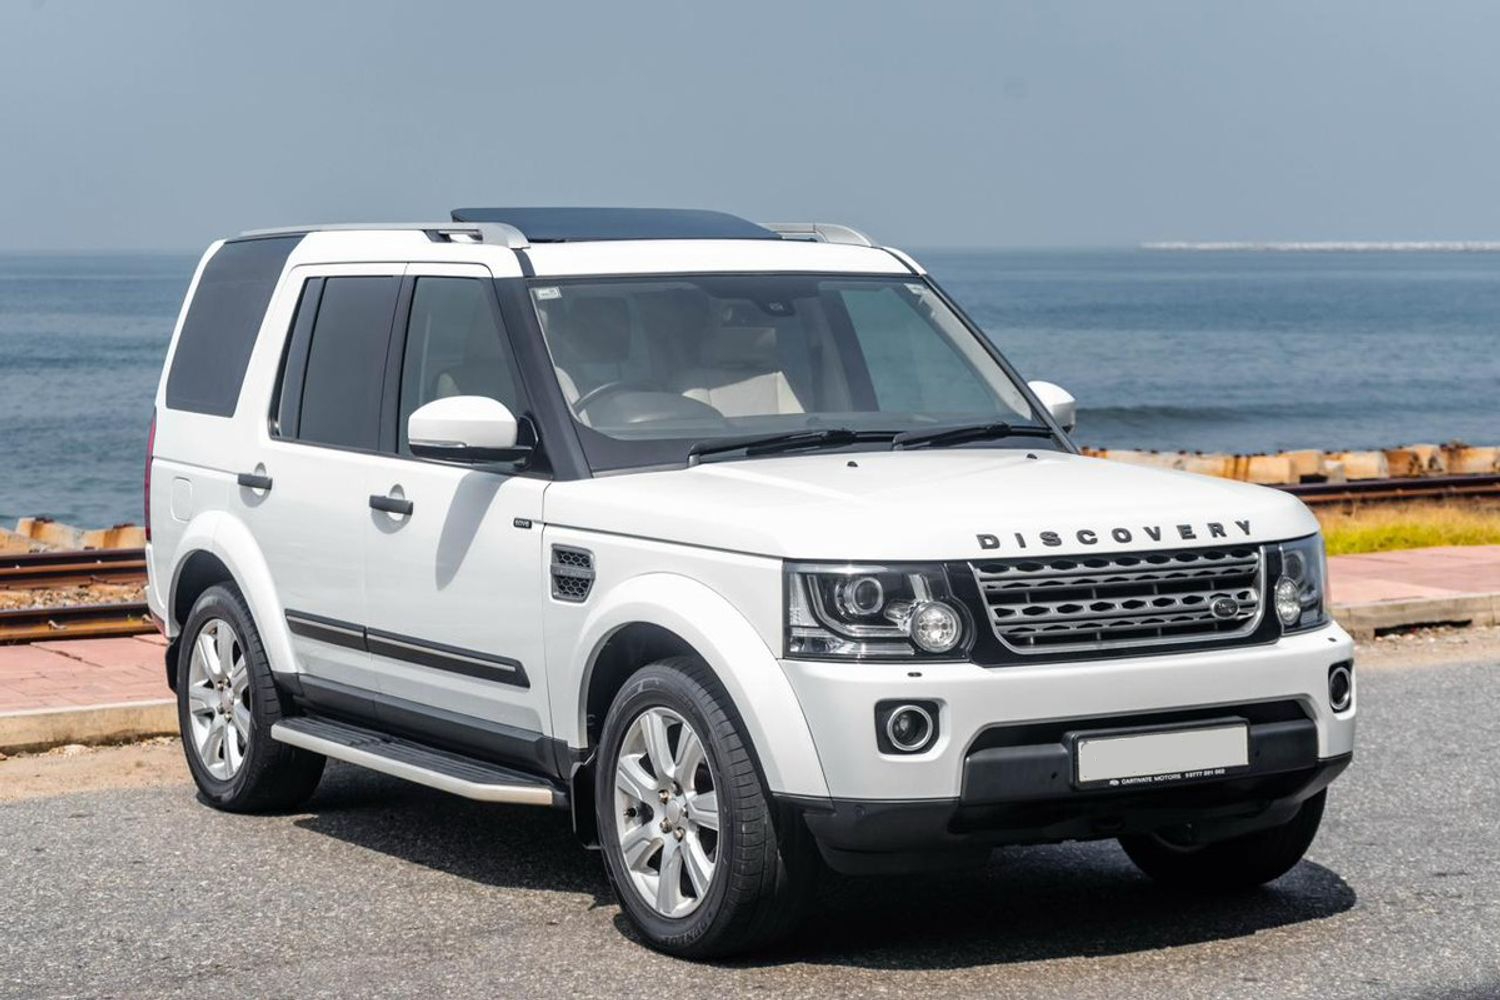 Porsche Taycan vs Land Rover Discovery Luxury